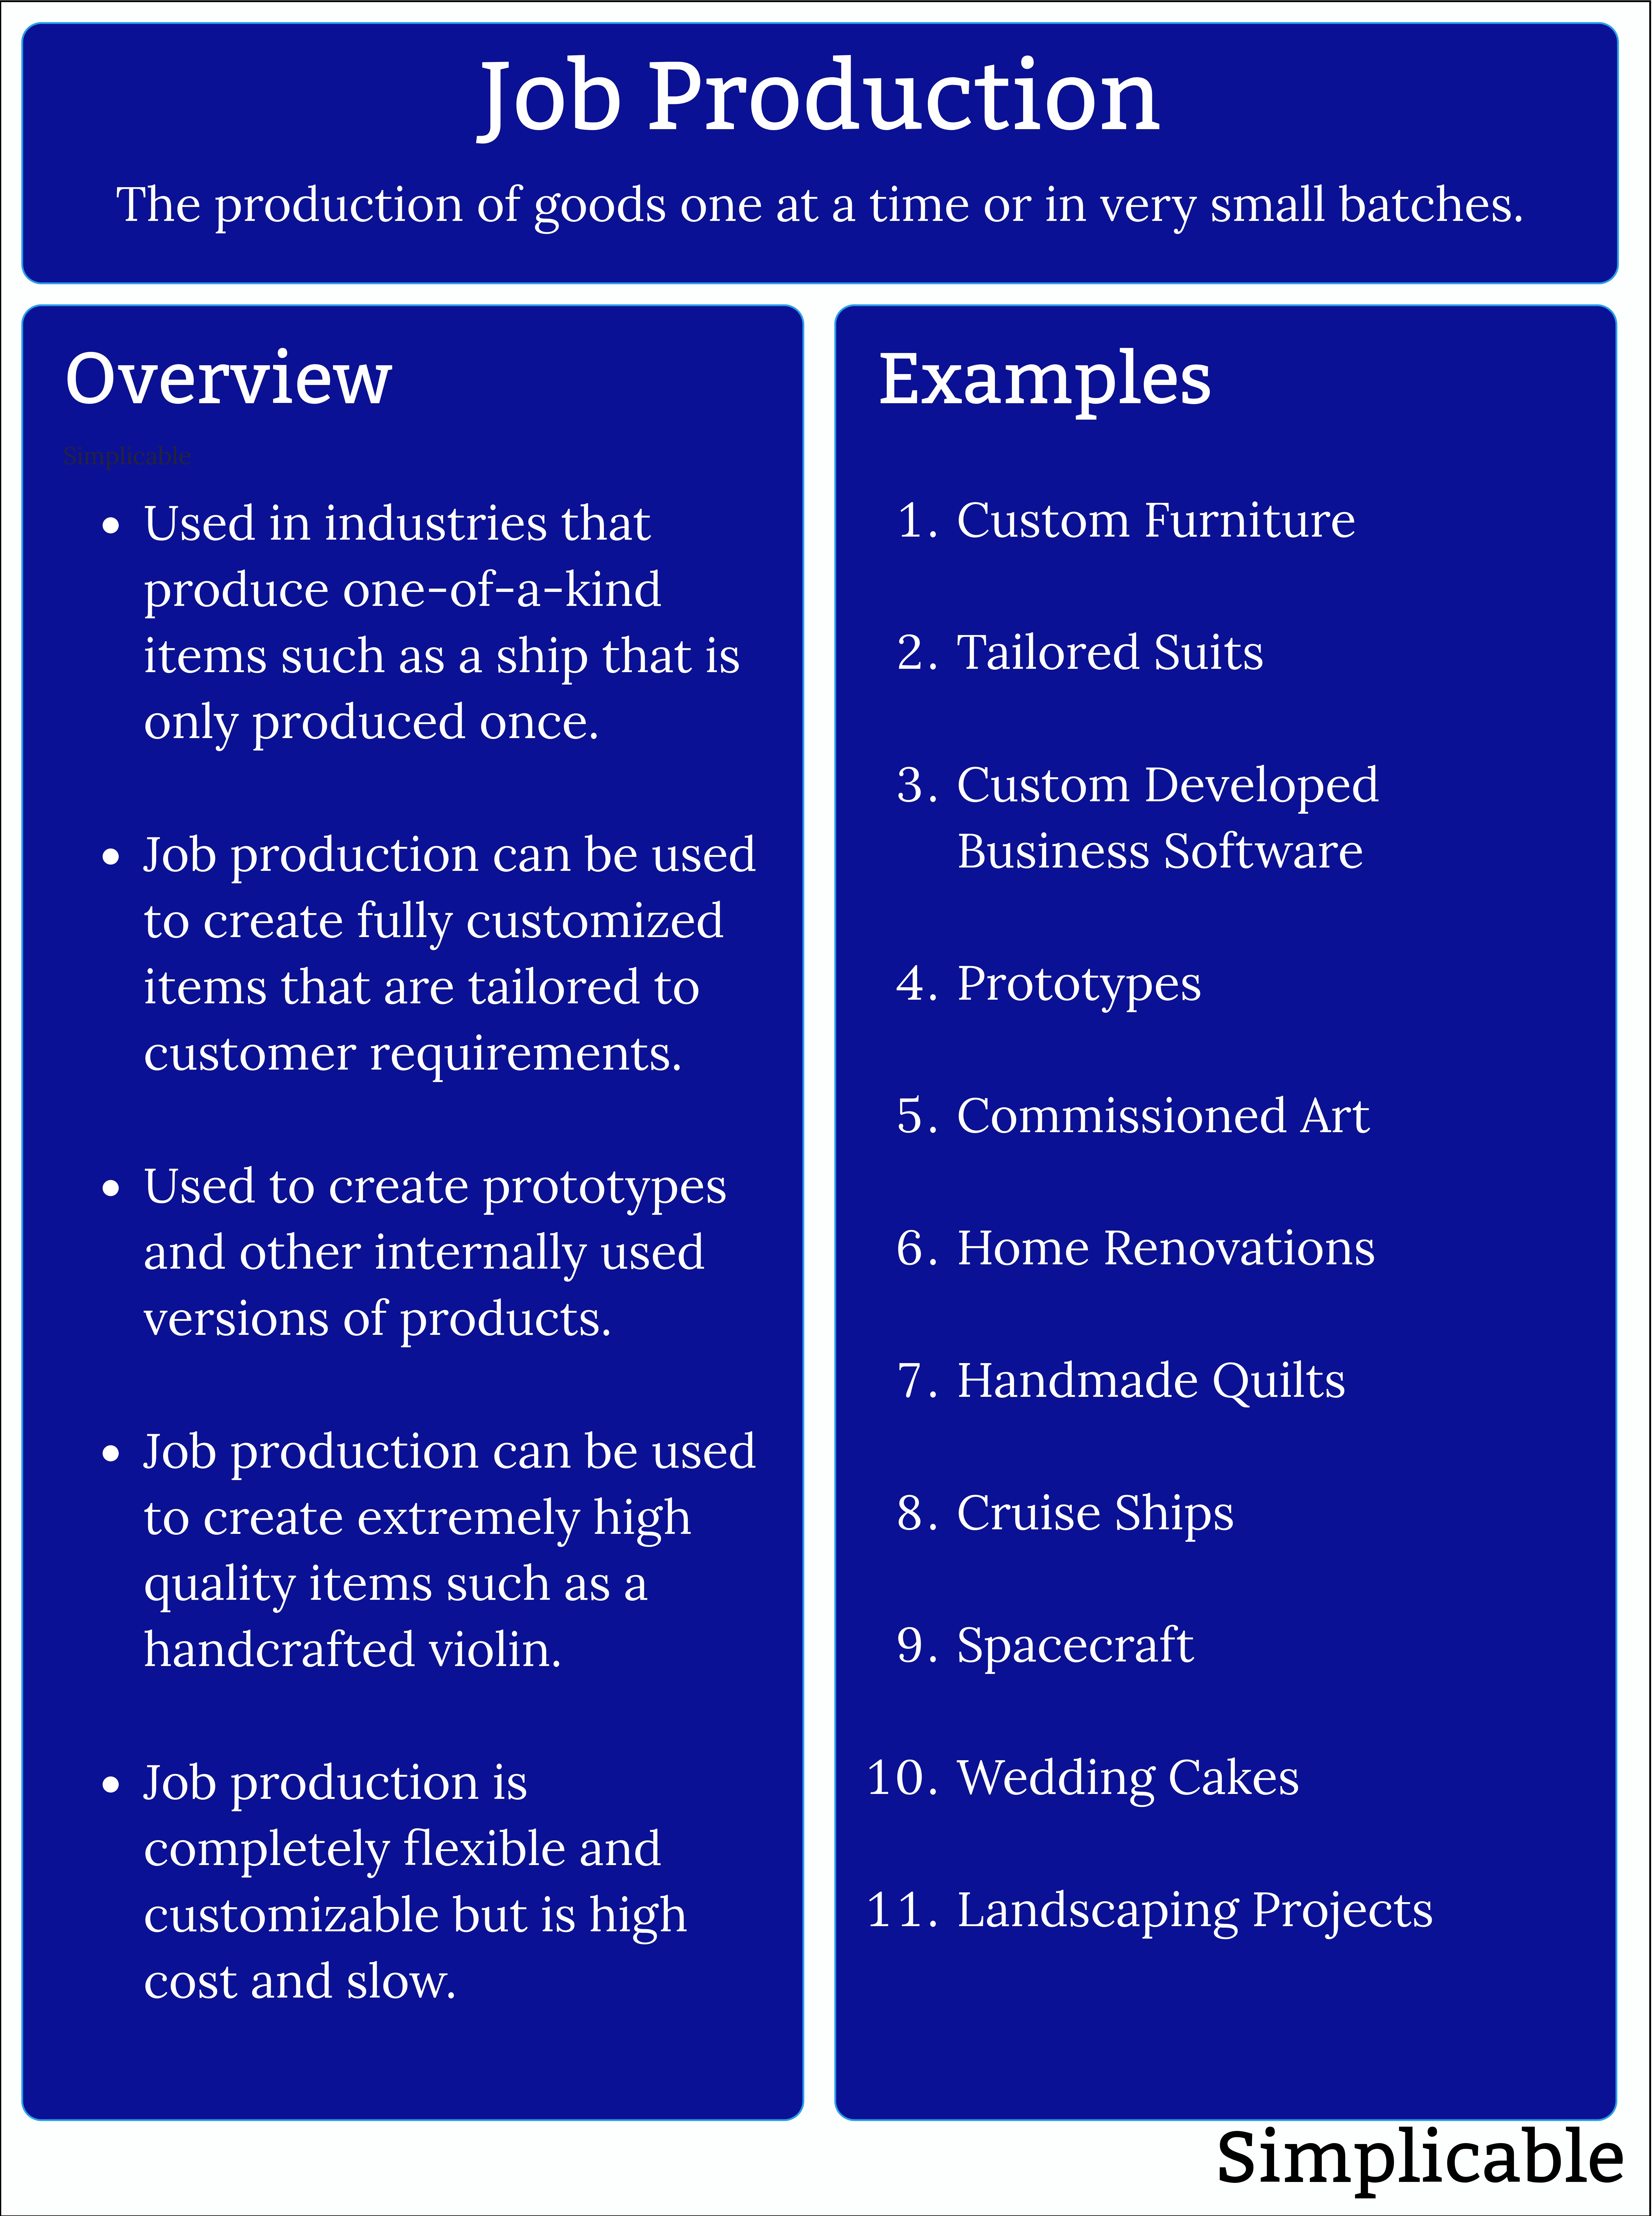 job production summary and examples